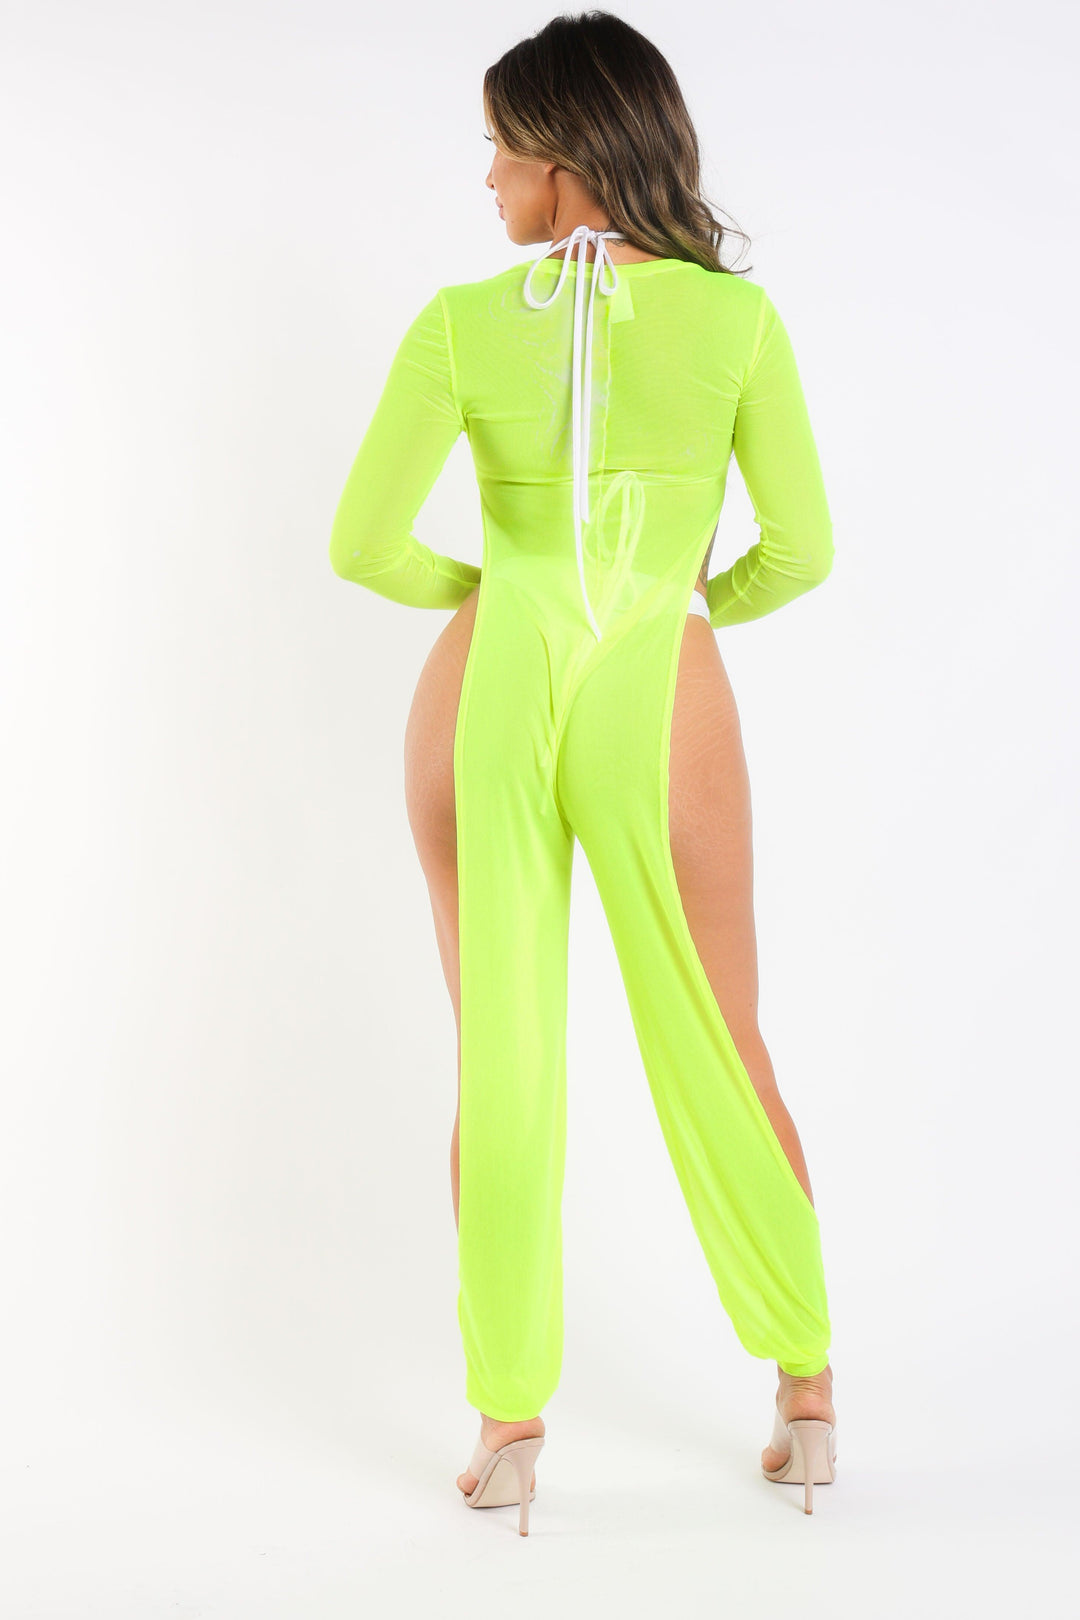 Sexy Mesh Cover Up Jumpsuit Summer Bodycon Beachwear NEON YELLOW - Brand My Case